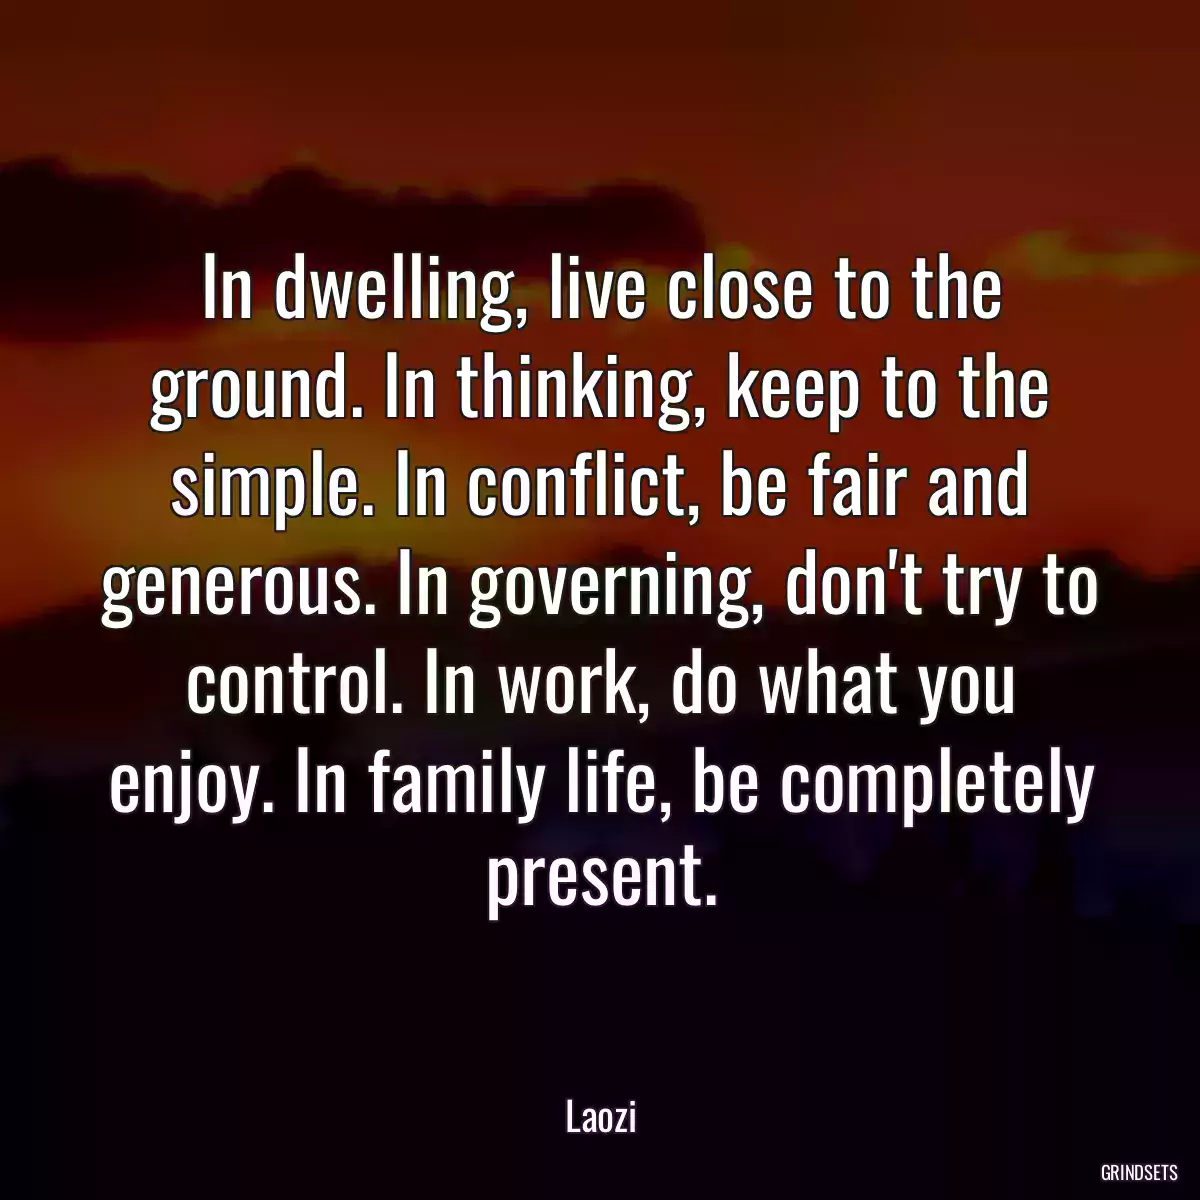 In dwelling, live close to the ground. In thinking, keep to the simple. In conflict, be fair and generous. In governing, don\'t try to control. In work, do what you enjoy. In family life, be completely present.